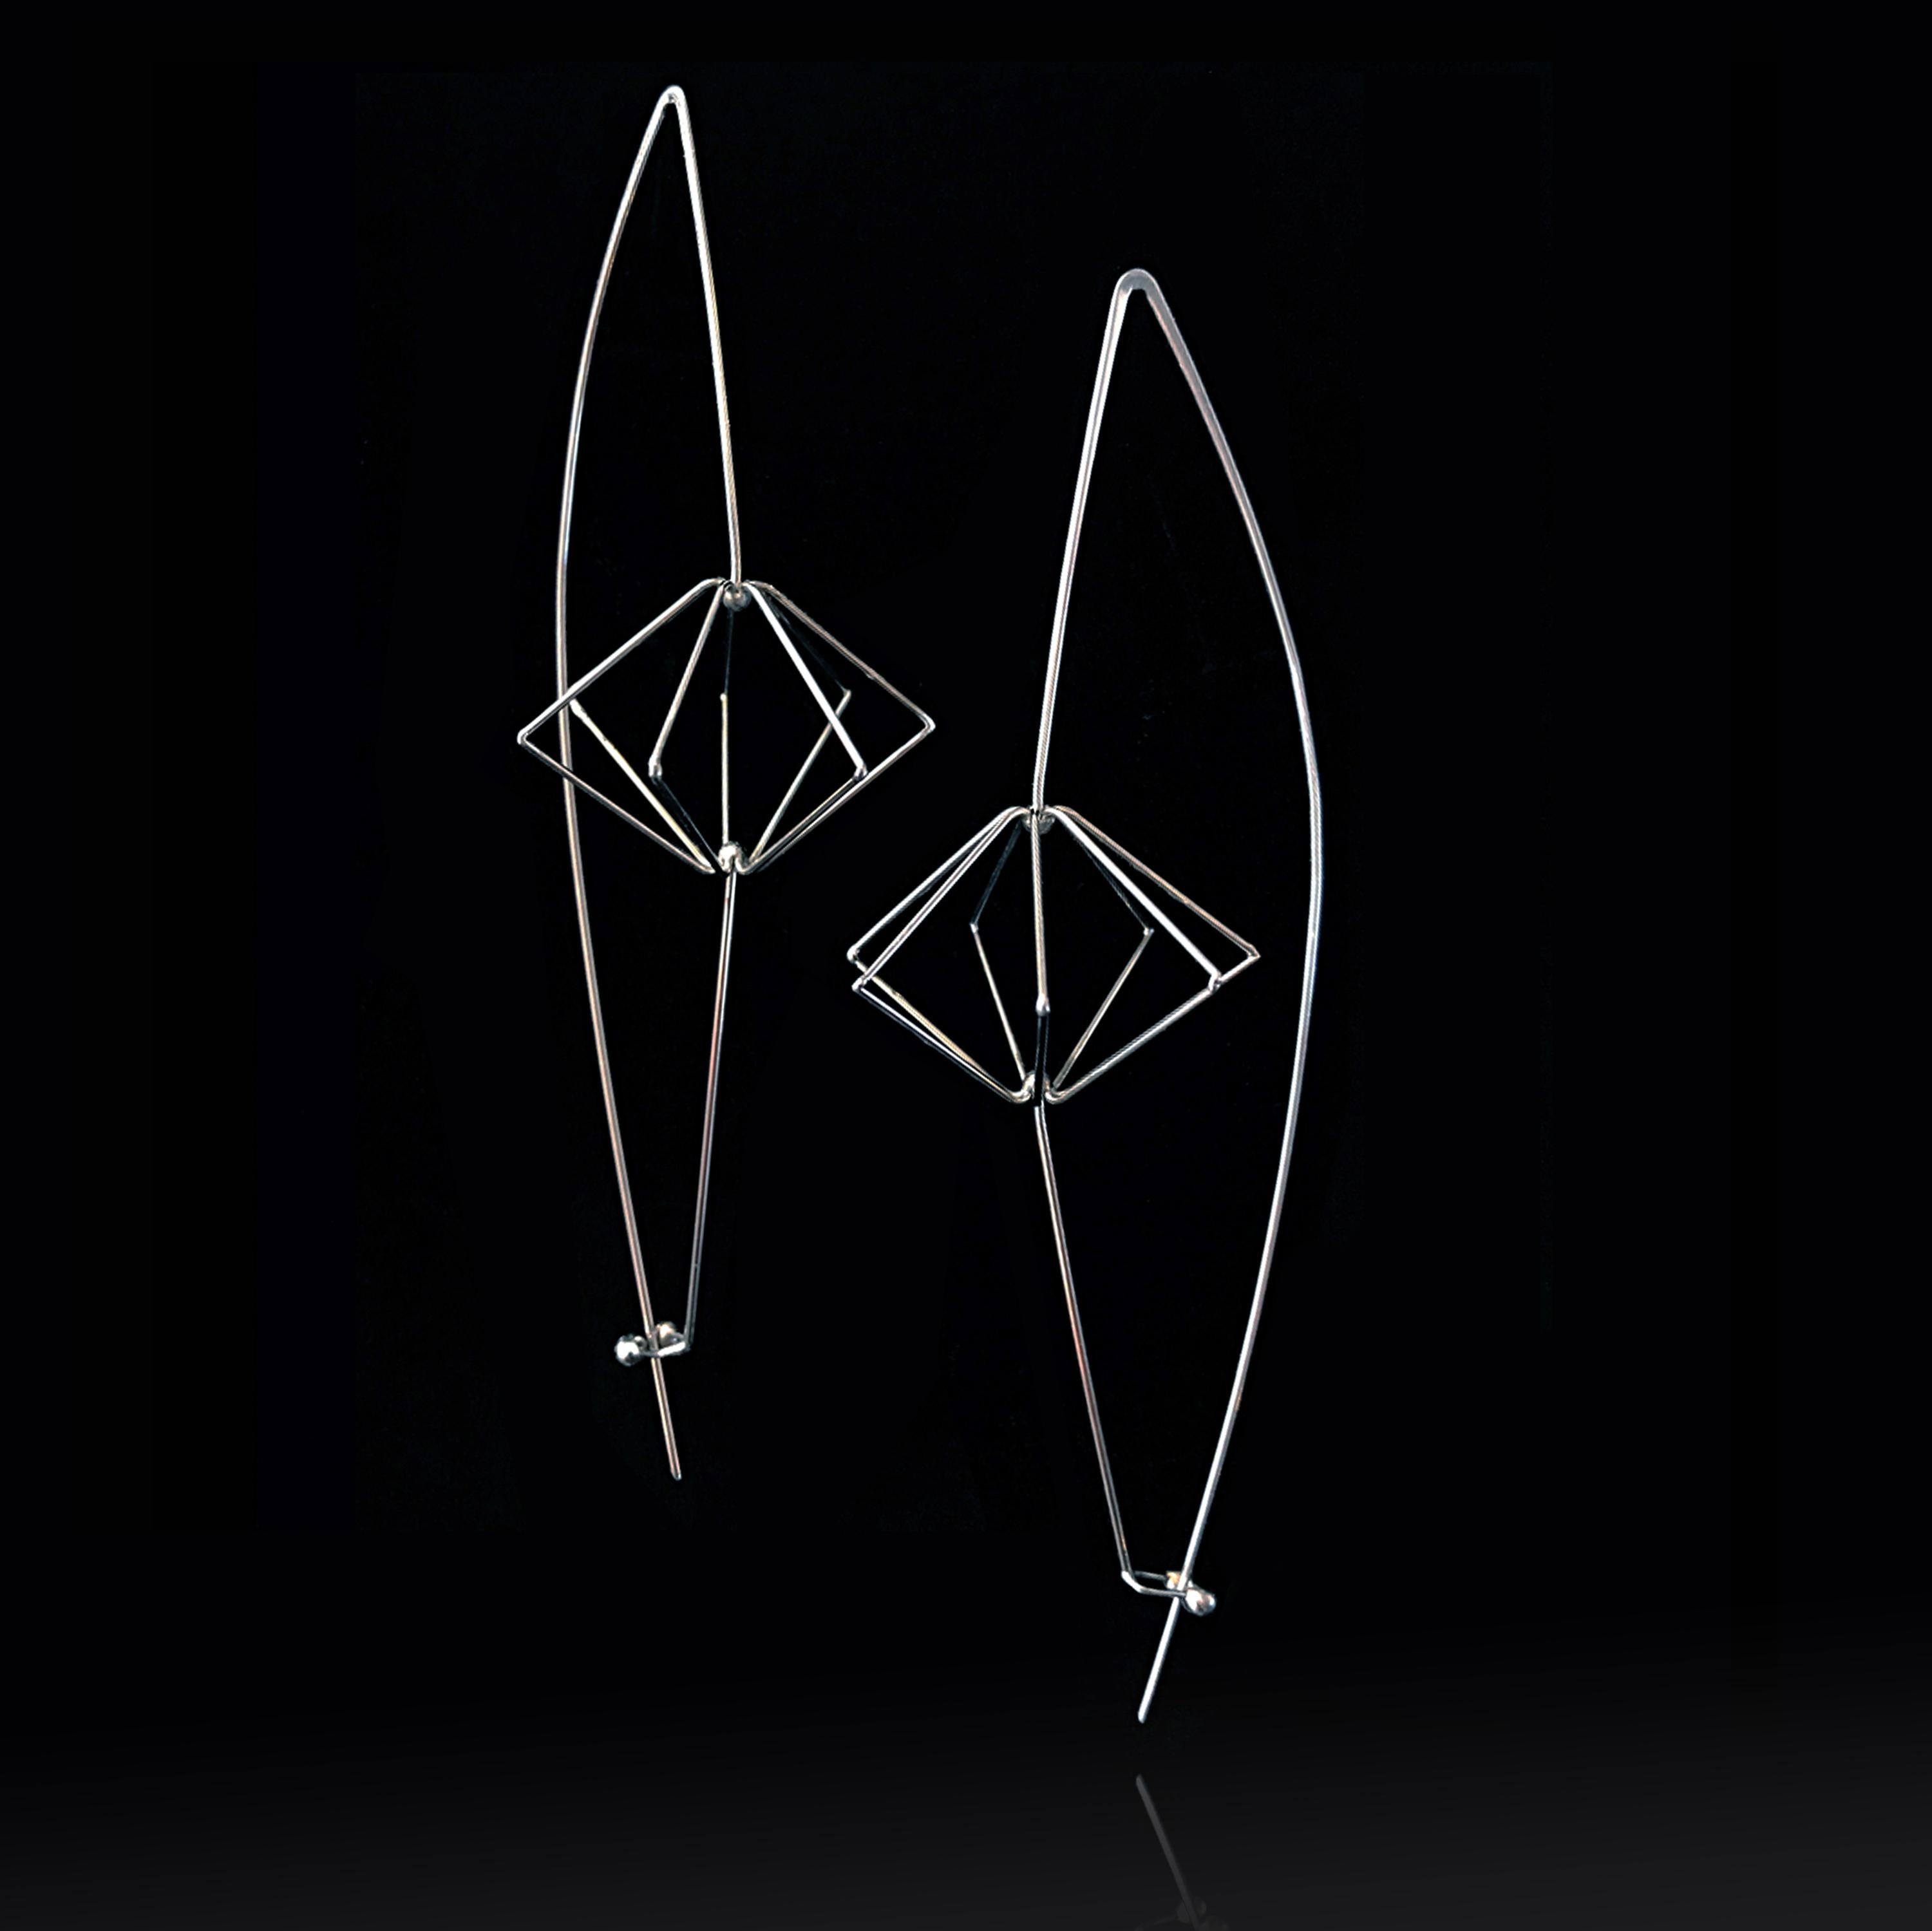 Julie Lake Abstract Sculpture - "Arecibo Earrings" a contemporary, fine gauge stainless steel earrings